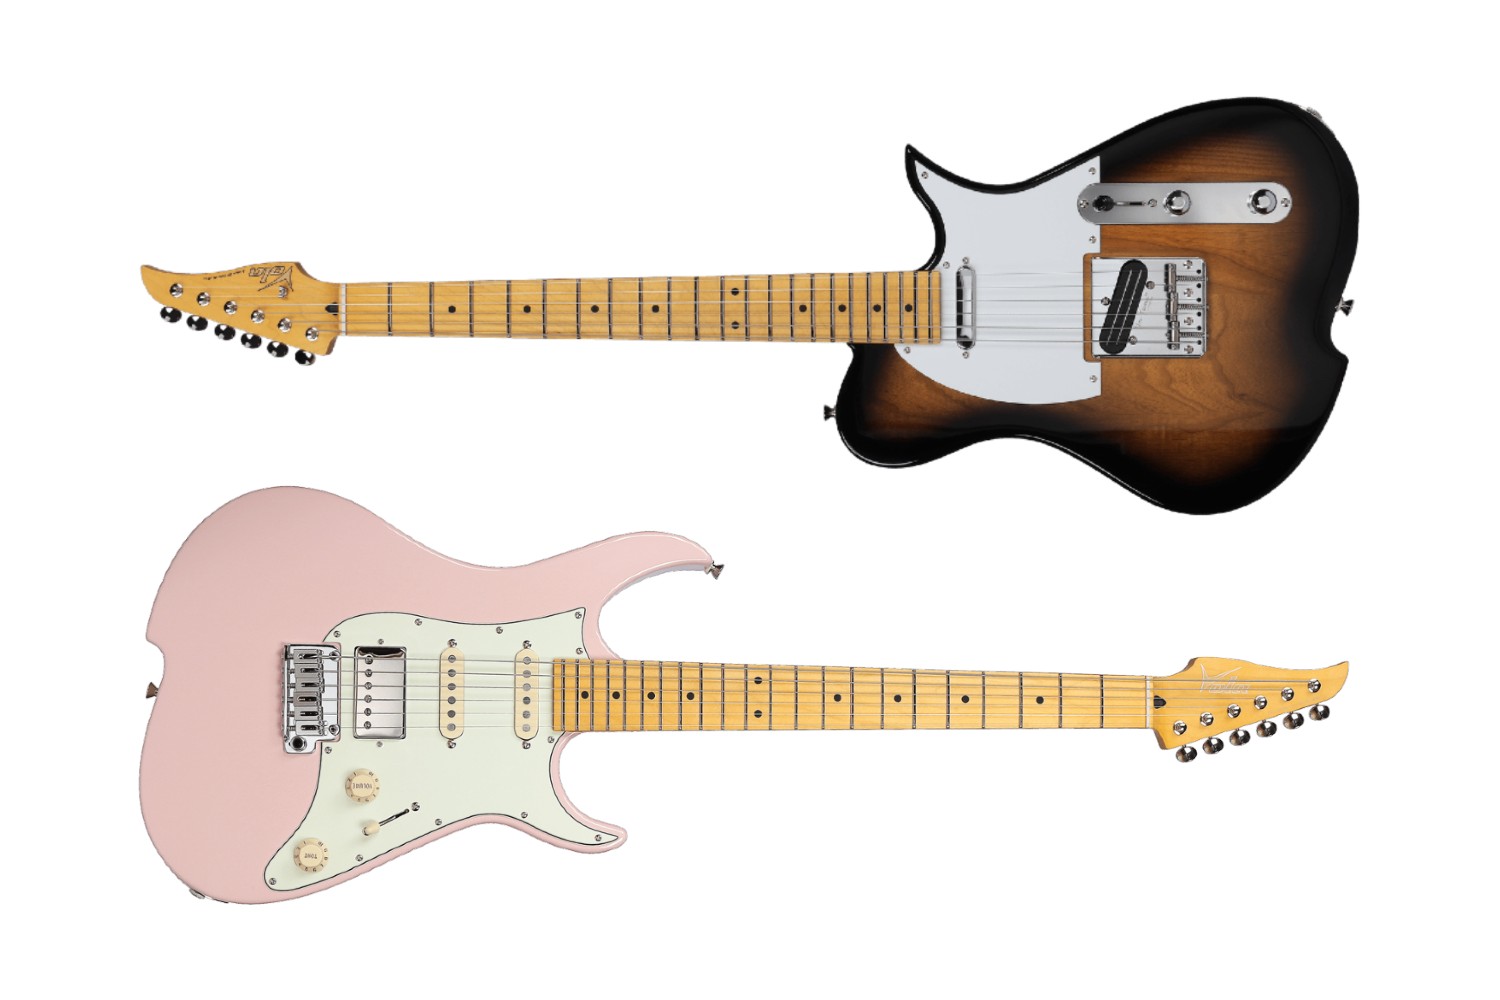 Vola Guitar's Oz and Vasti models receive modern updates with V3